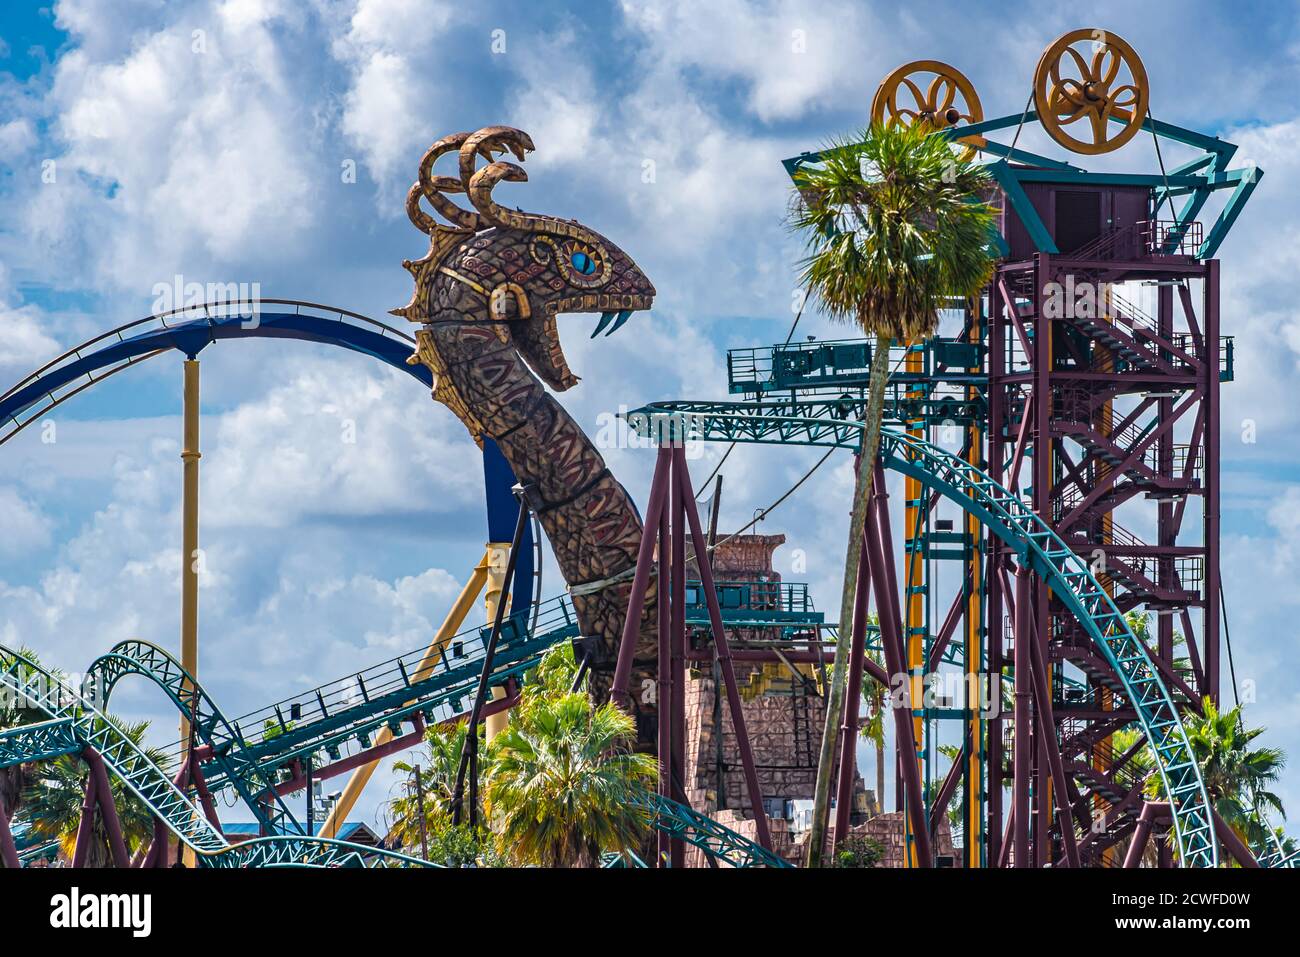 Cobra's Curse, a steel spinning roller coaster at Busch Gardens Tampa Bay in Tampa, Florida. (USA) Stock Photo